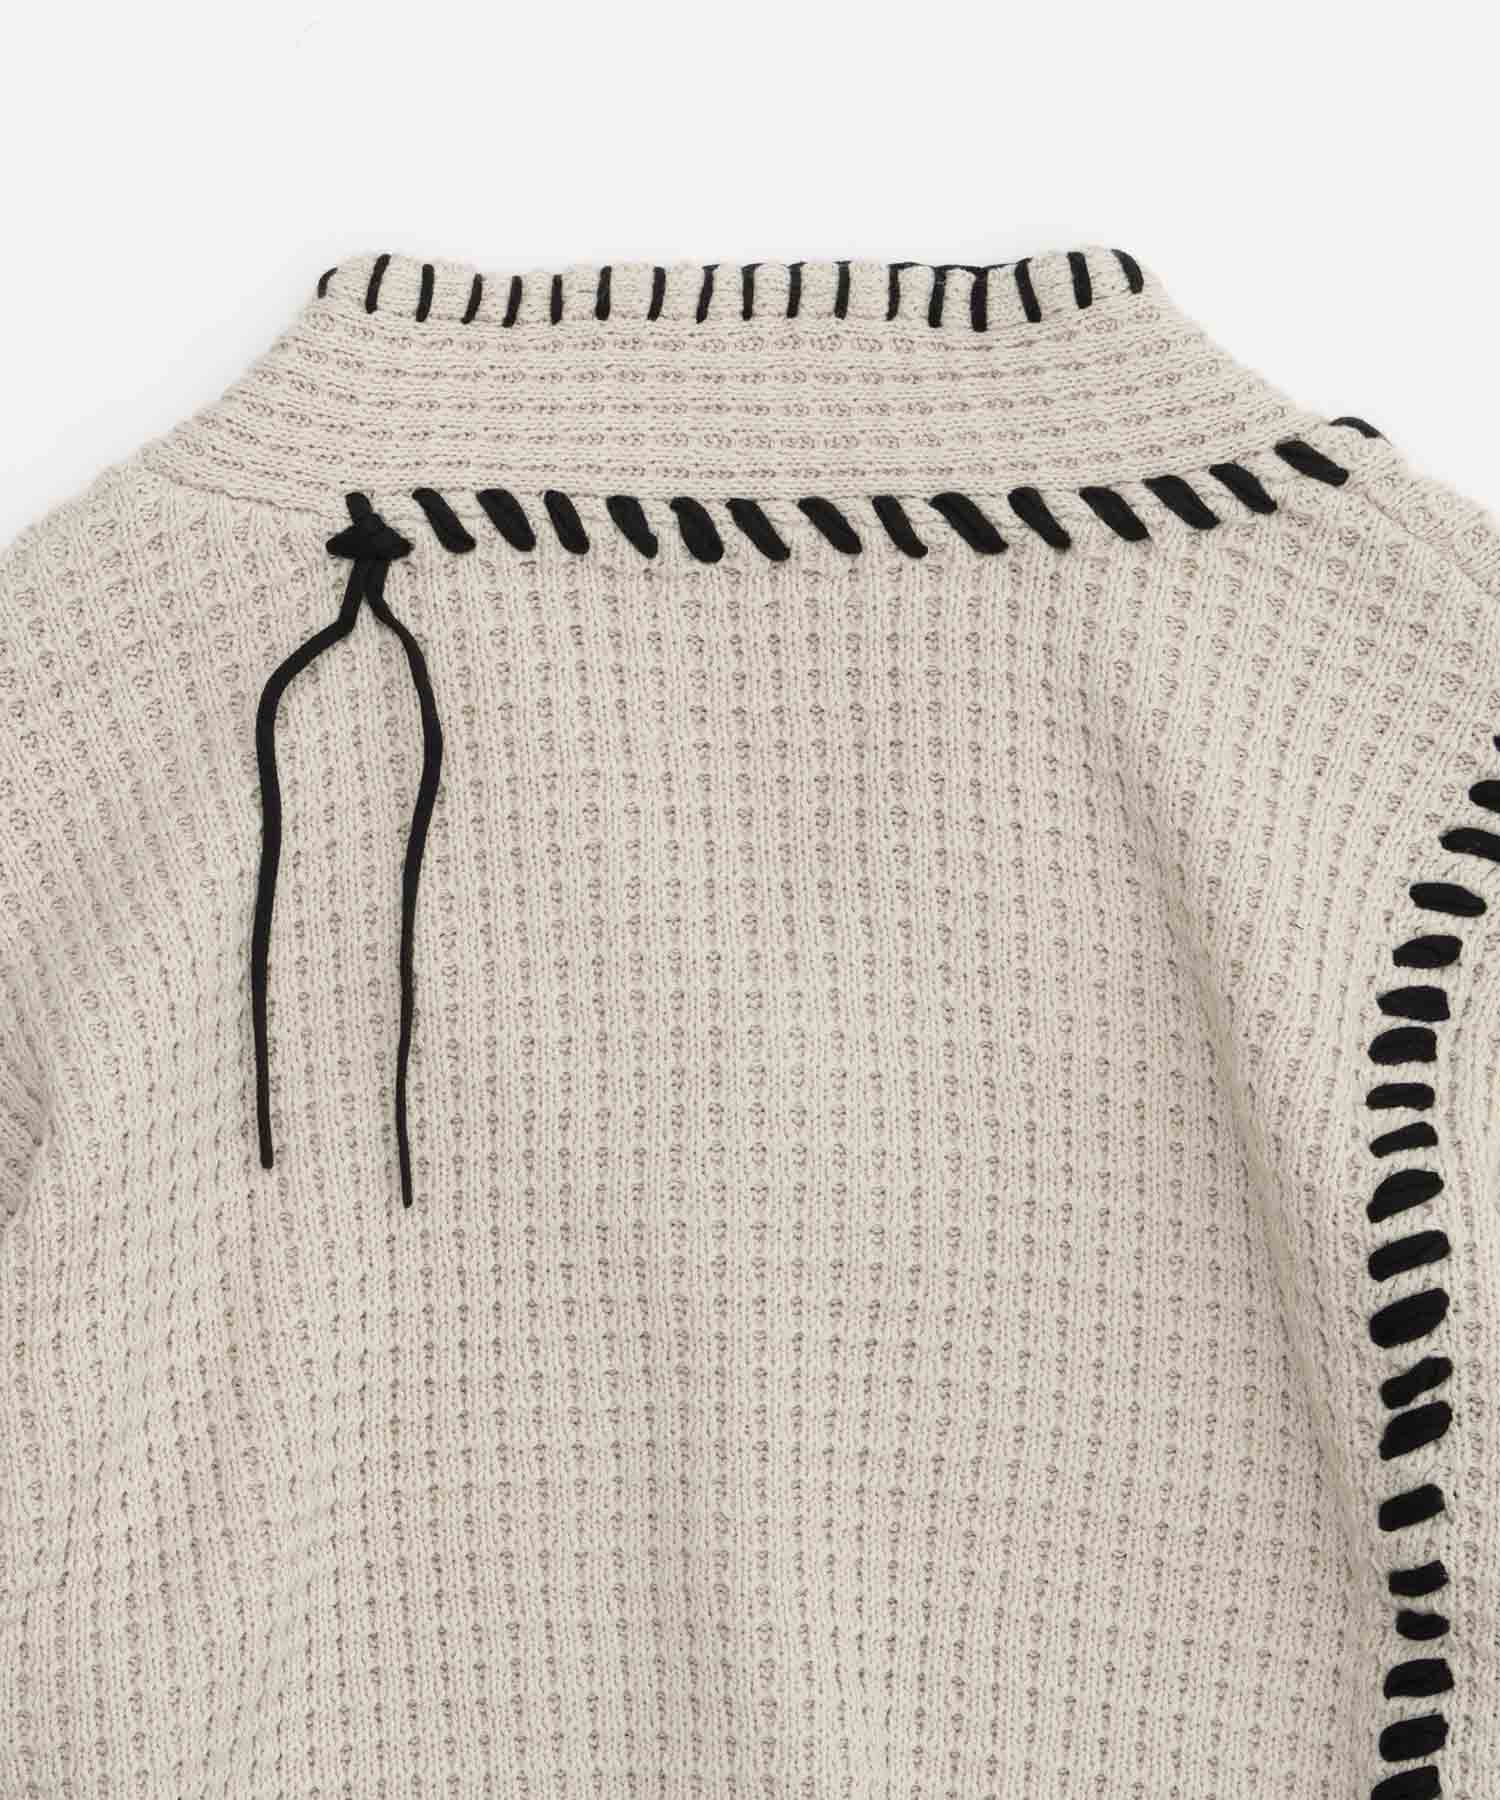 Oni-Waffle Embroidery Prime-Over V-Neck Knit Pullover